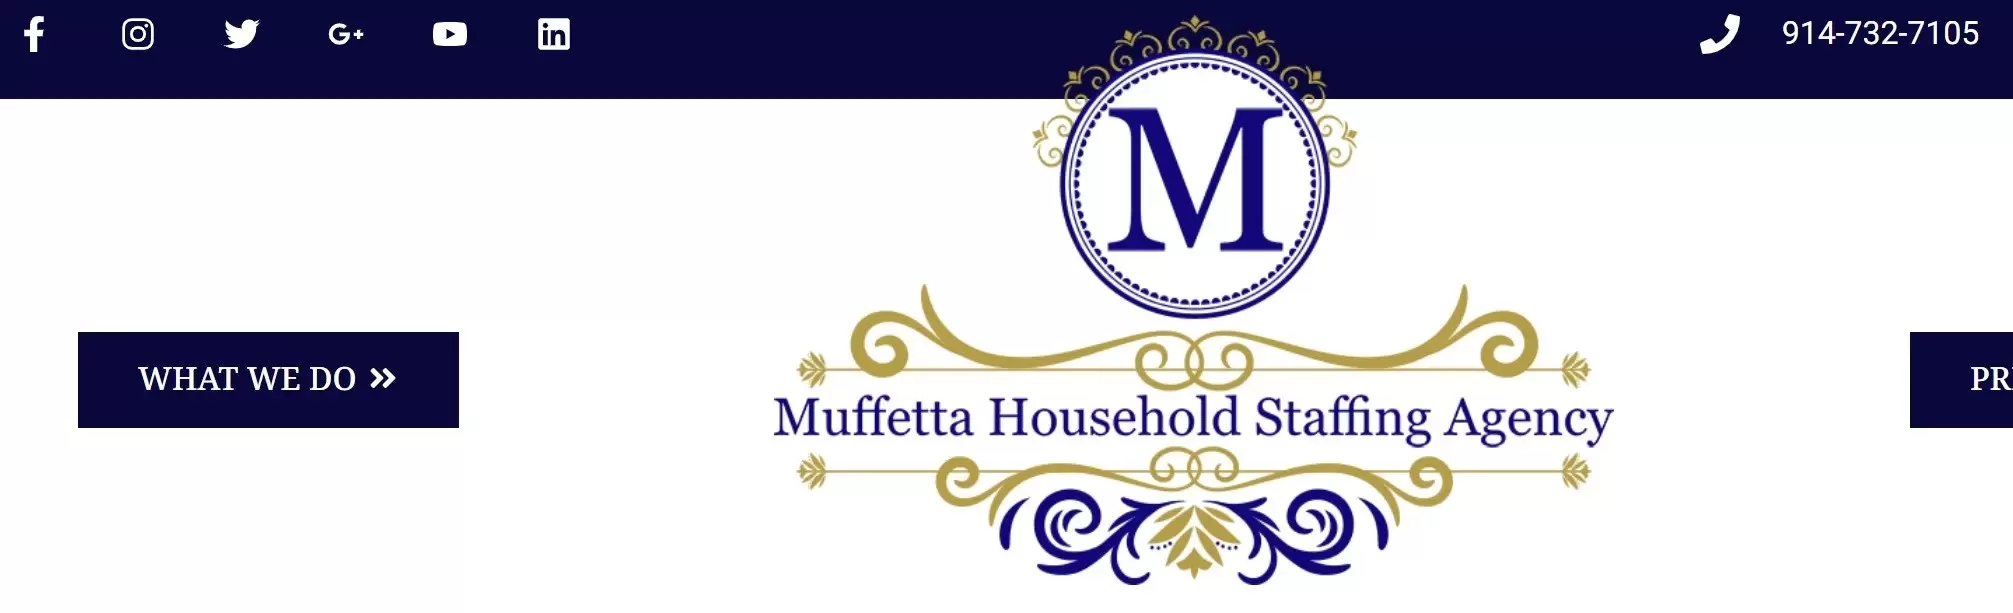 Muffetta Household Staffing Agency company profile and reviews